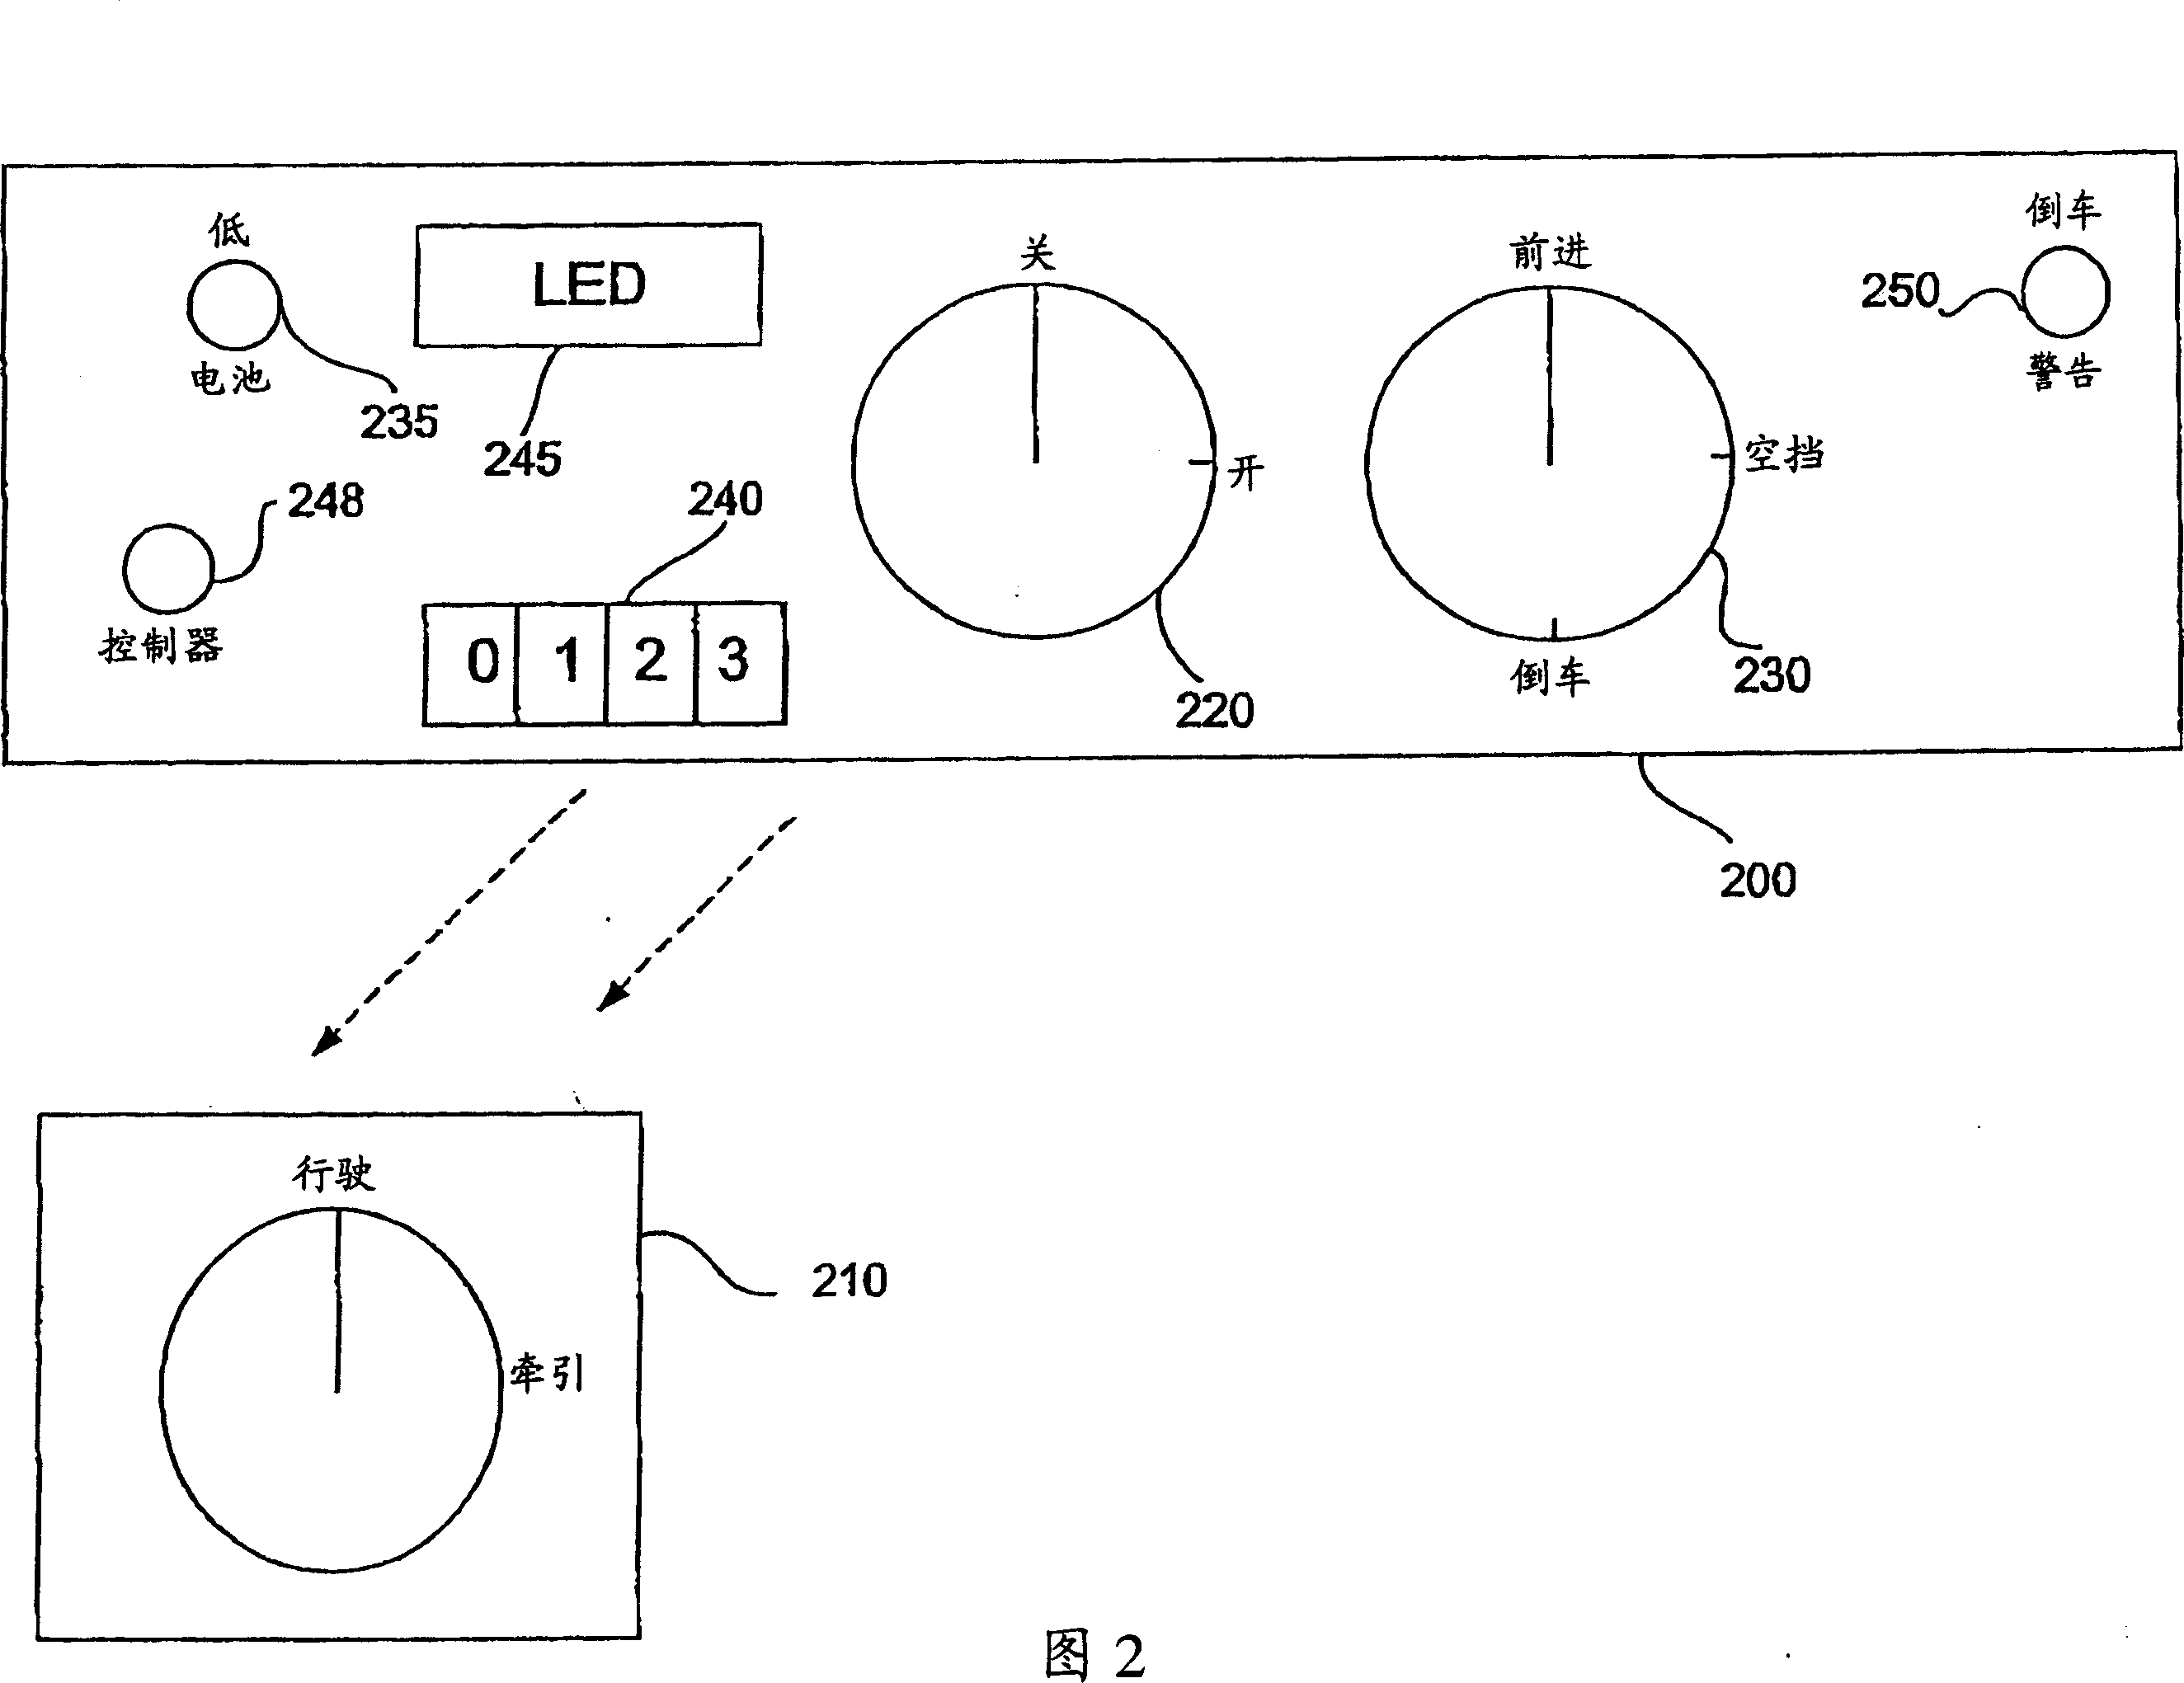 Ac drive system for electrically operated vehicle